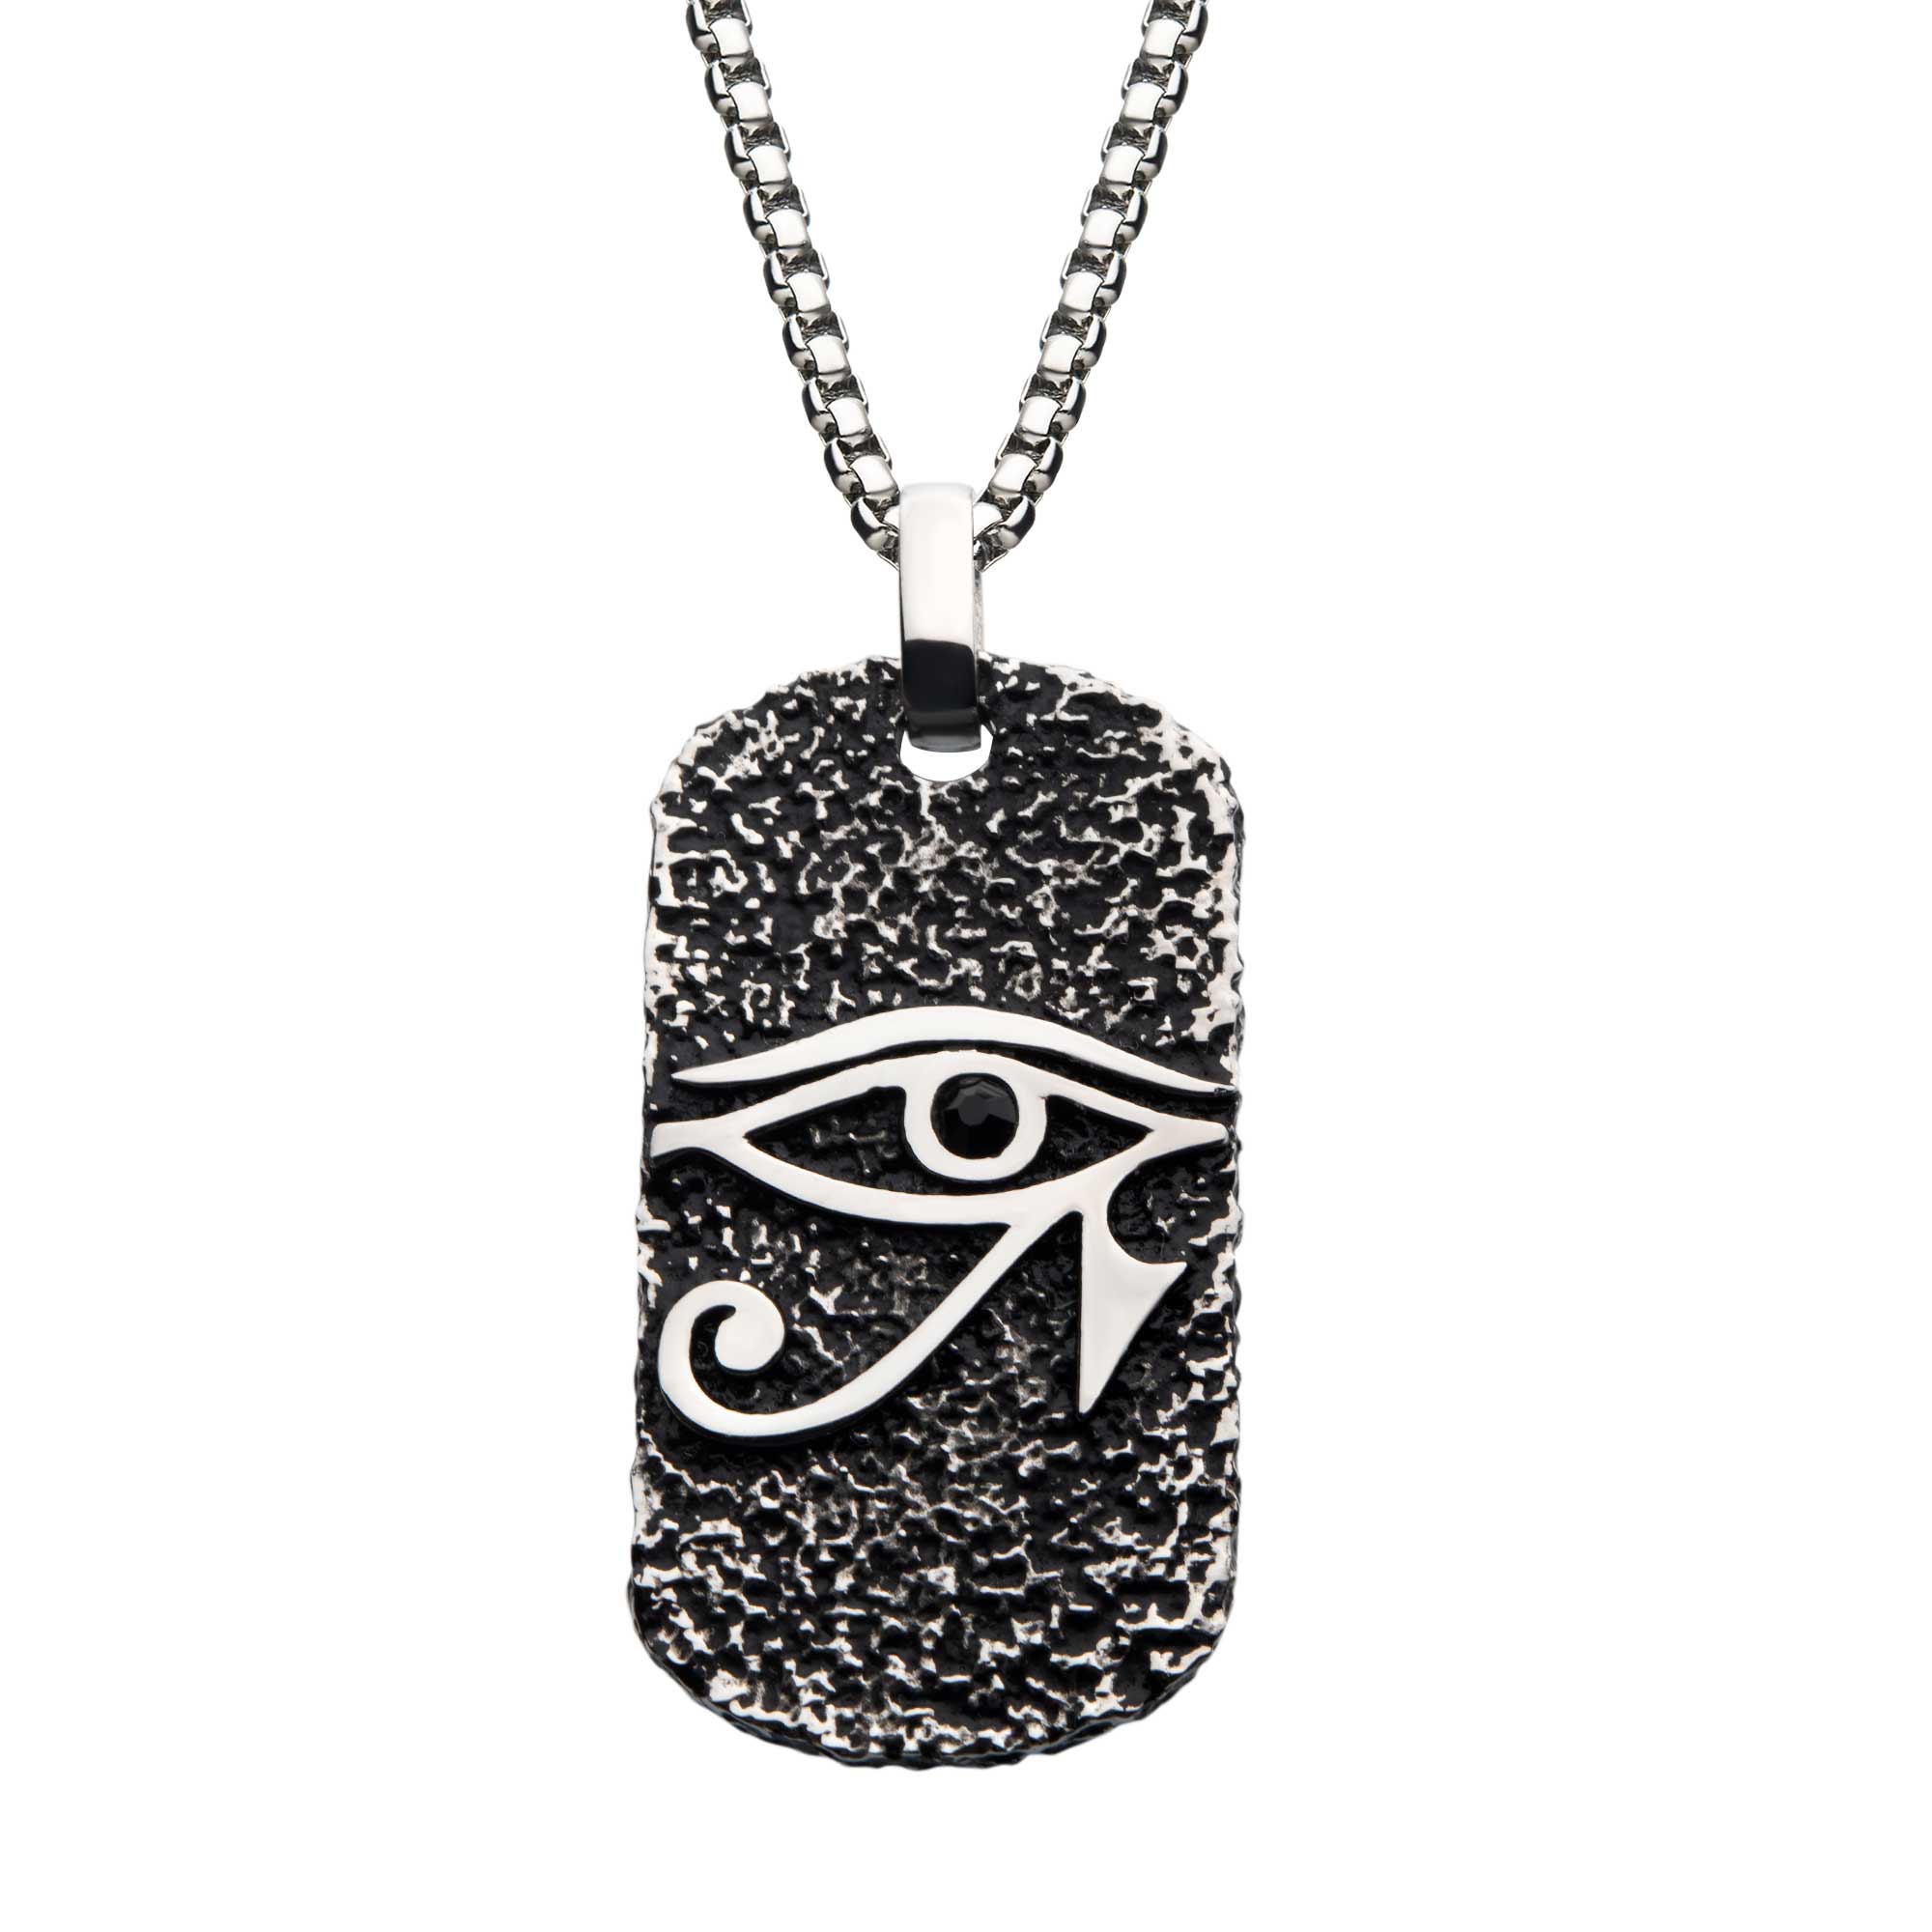 Black Oxidized Stainless Steel with Black CZ Eye of Horus Dog Tag Pendant, with Steel Box Chain Morin Jewelers Southbridge, MA